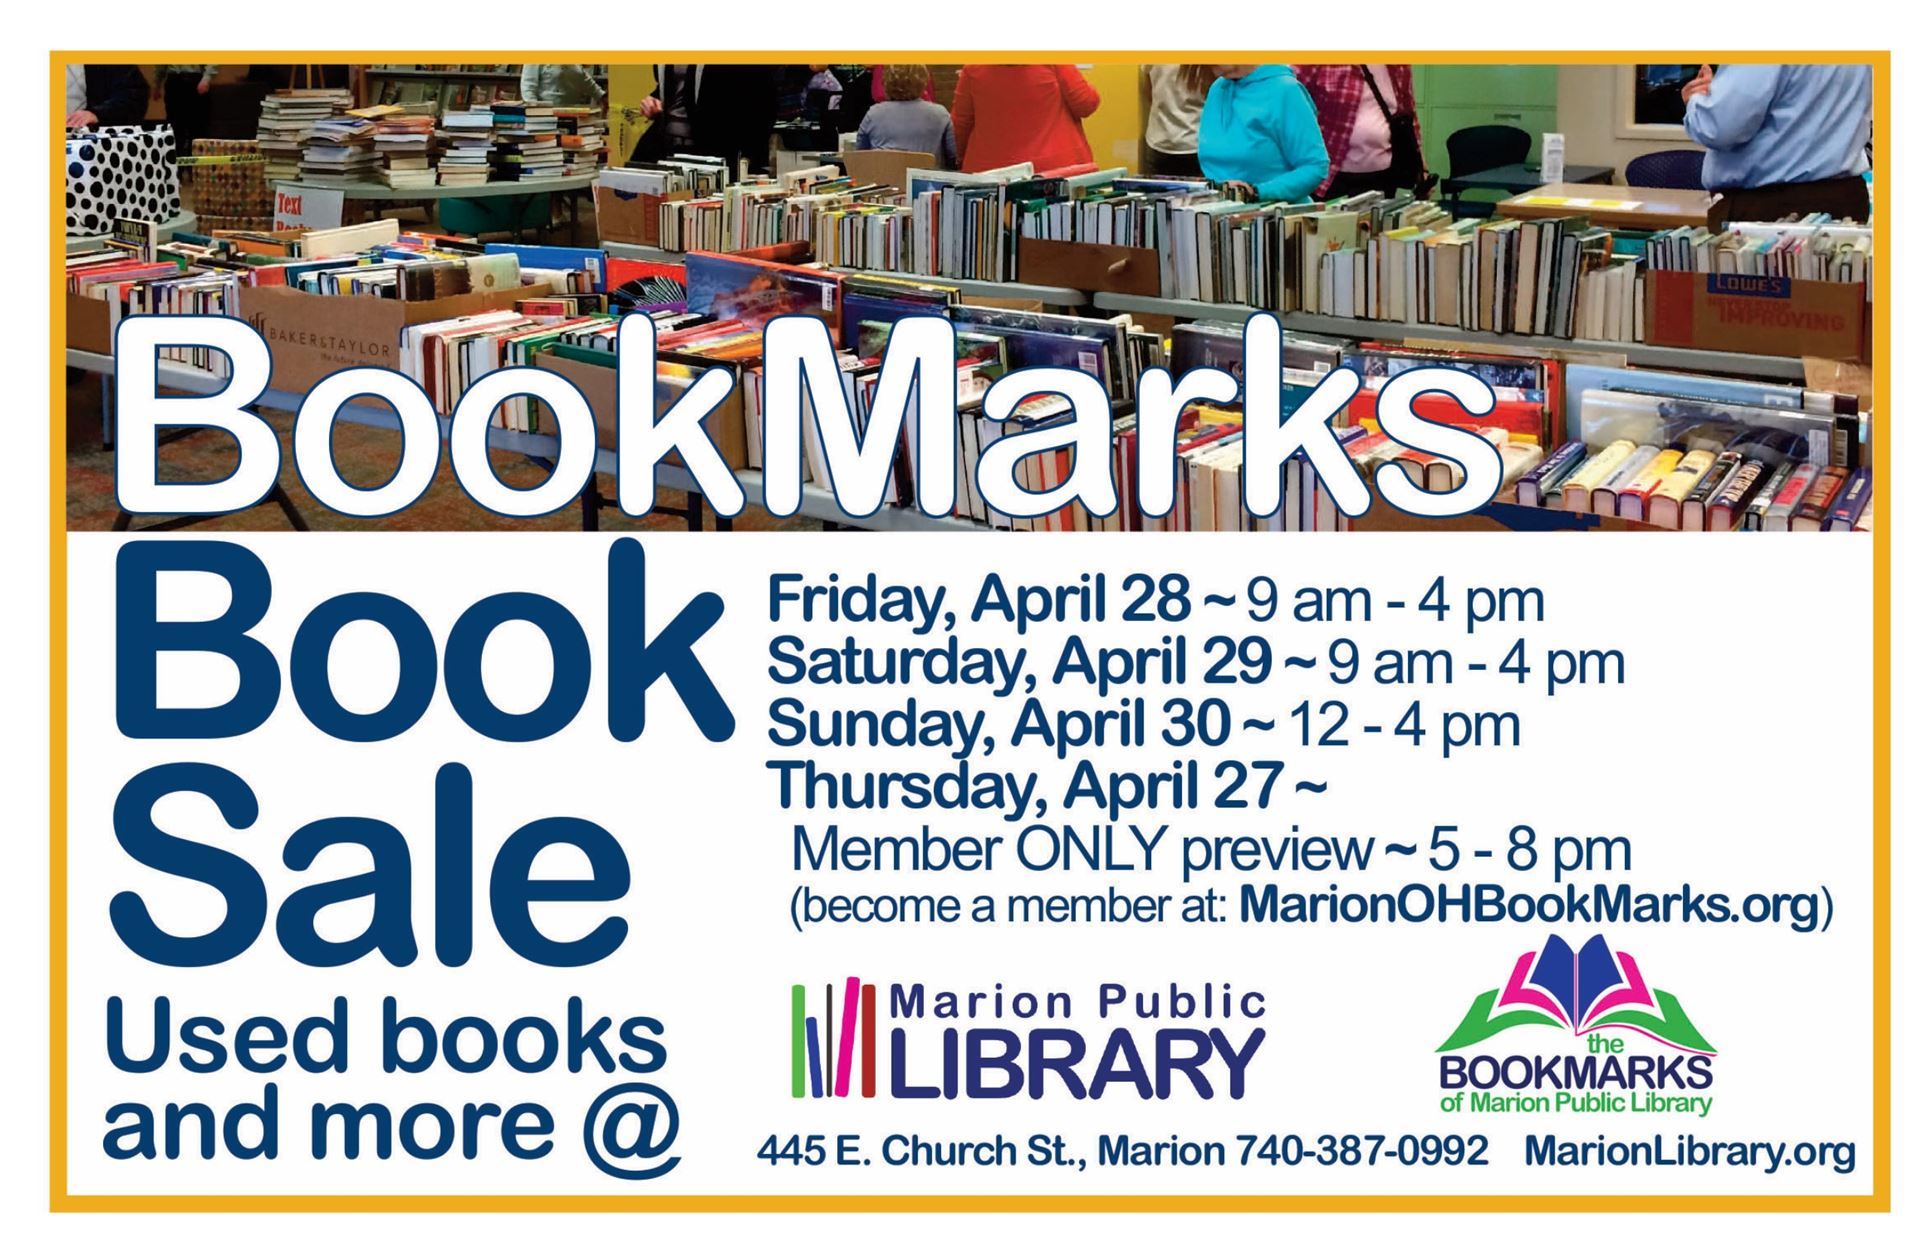 BookMarks: a Marion Public Library Friends Group - BookMarks Annual ...